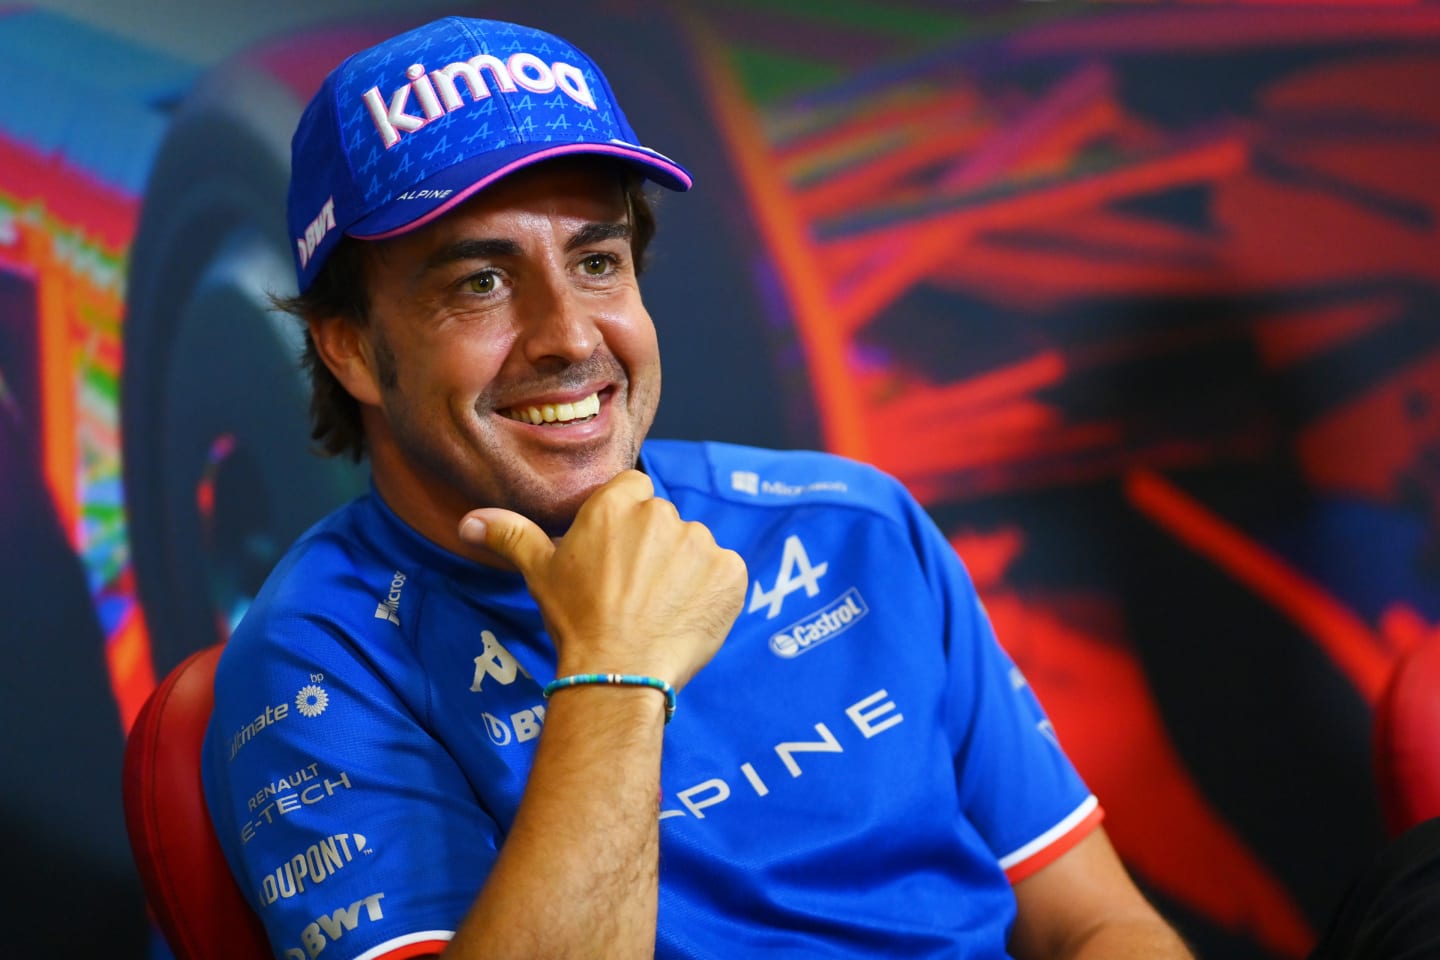 MONZA, ITALY - SEPTEMBER 08: Fernando Alonso of Spain and Alpine F1 talks in the drivers press conference during previews ahead of the F1 Grand Prix of Italy at Autodromo Nazionale Monza on September 08, 2022 in Monza, Italy. (Photo by Dan Mullan/Getty Images)